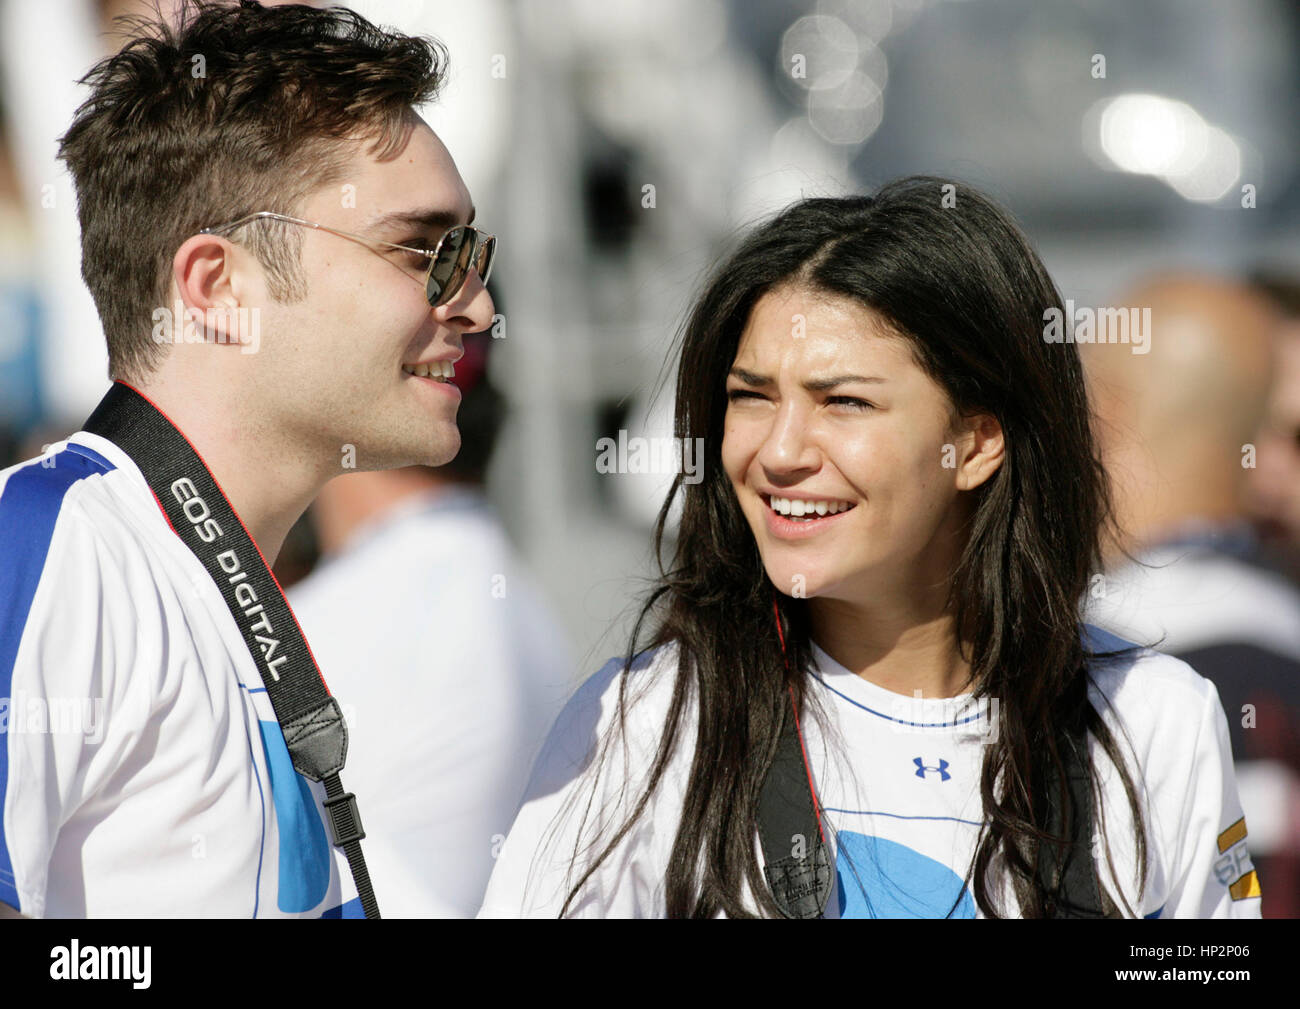 Ed Westwick and Jessica Szohr at the Directv Celebrity Beach Bowl in Miami Beach, Florida on February 6, 2010. Francis Specker Stock Photo